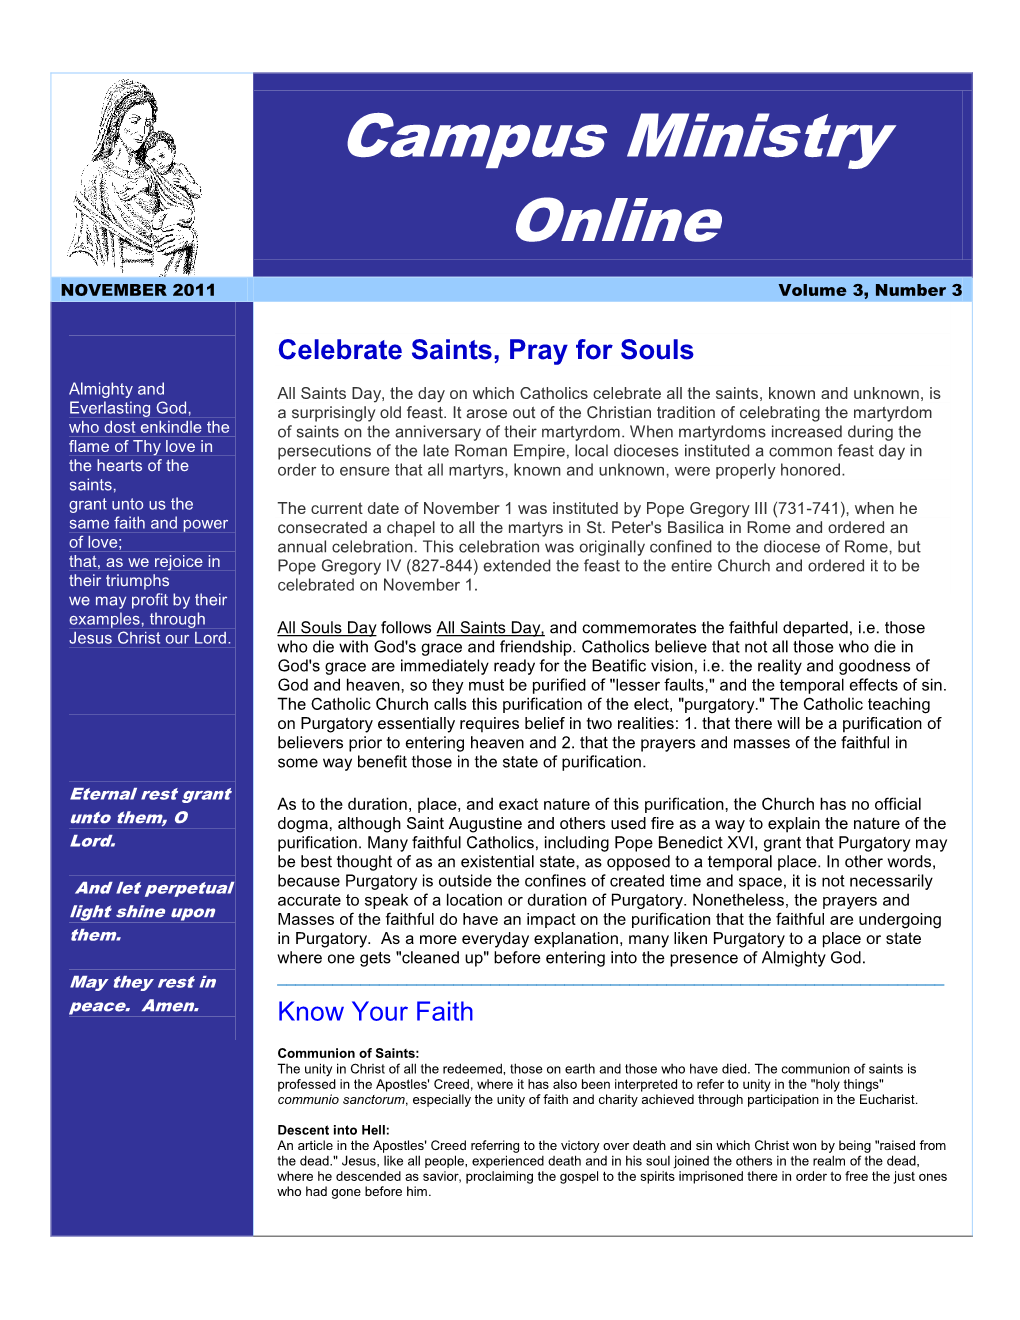 Campus Ministry Online